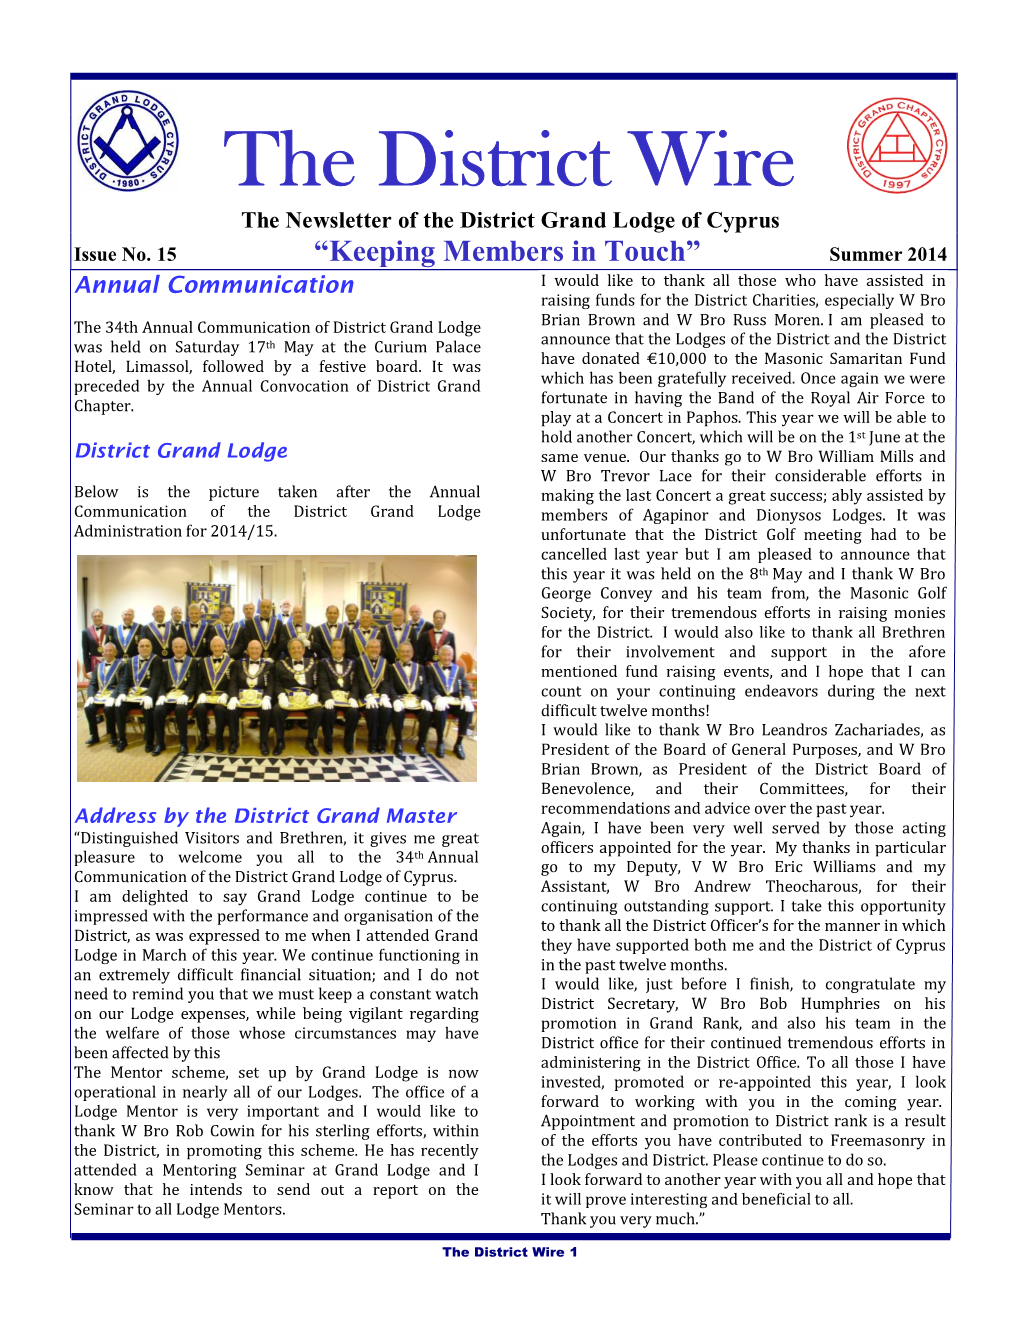 The District Wire the Newsletter of the District Grand Lodge of Cyprus Issue No